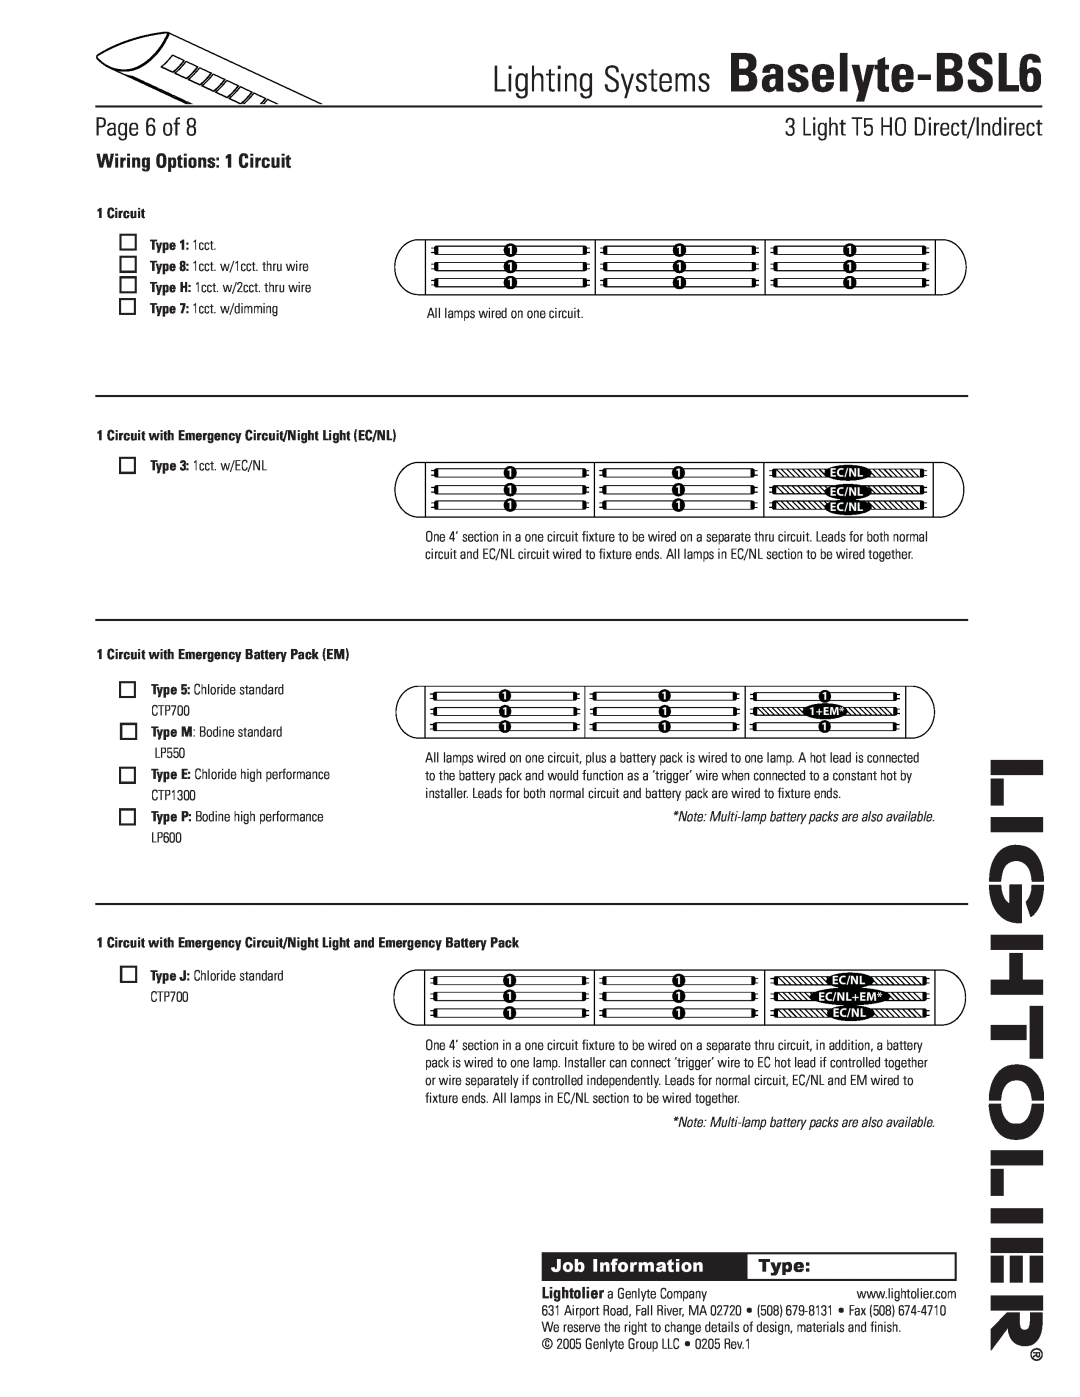 Lightolier Baselyte-BSL6 Wiring Options 1 Circuit, Circuit Type 1 1cct, Circuit with Emergency Battery Pack EM, Page of 